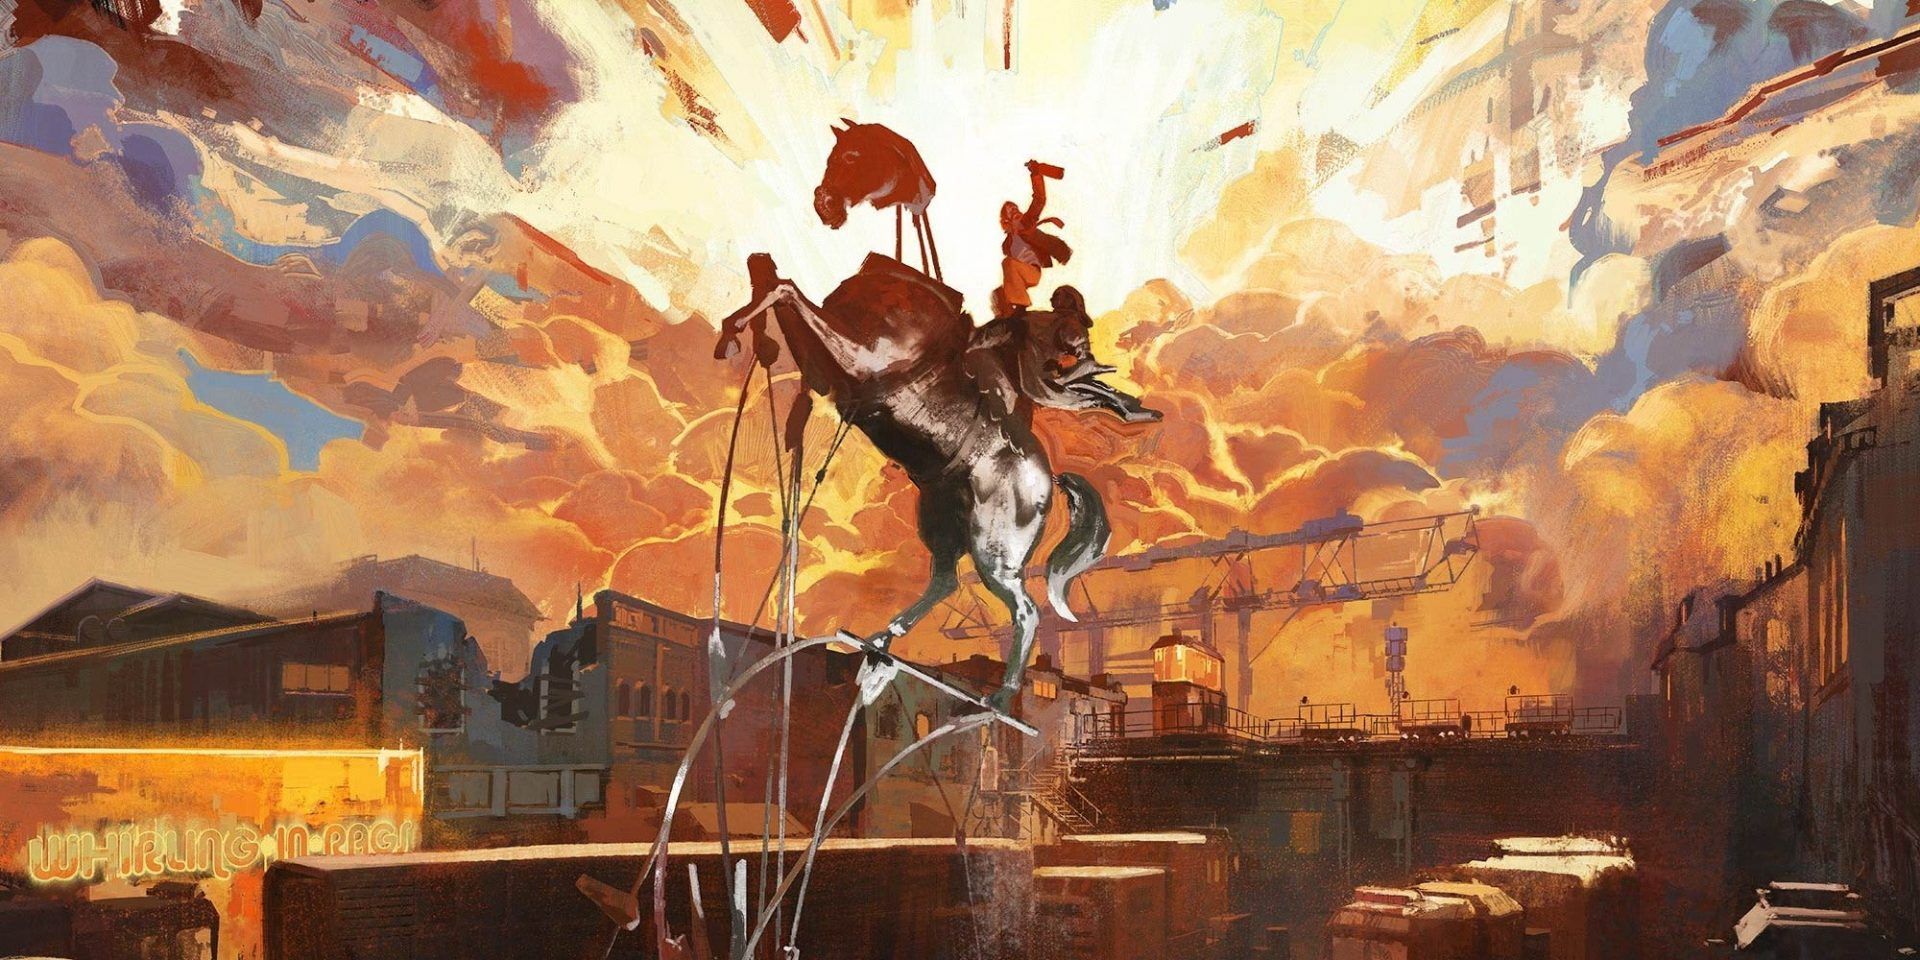 The statue of King Filippe III from Disco Elysium. A blown apart statue stands reconstructed against a gorgeous sunset.